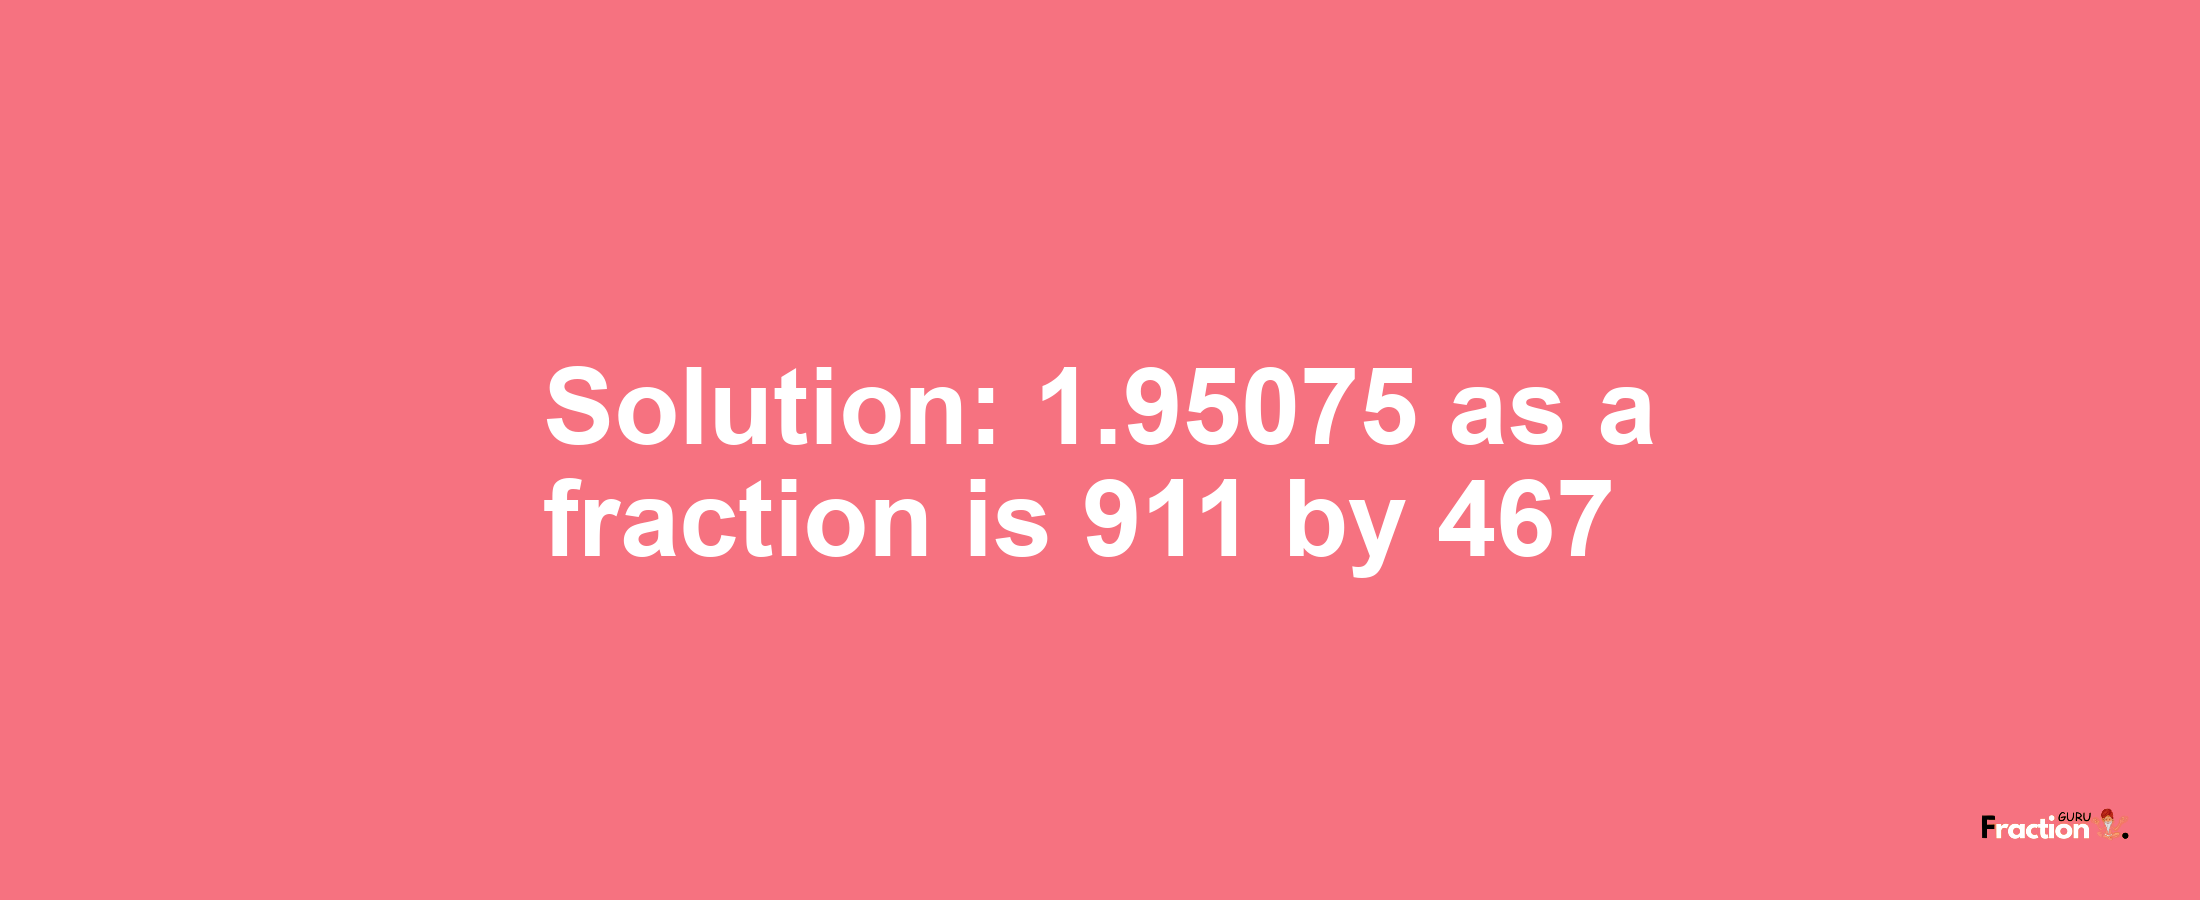 Solution:1.95075 as a fraction is 911/467